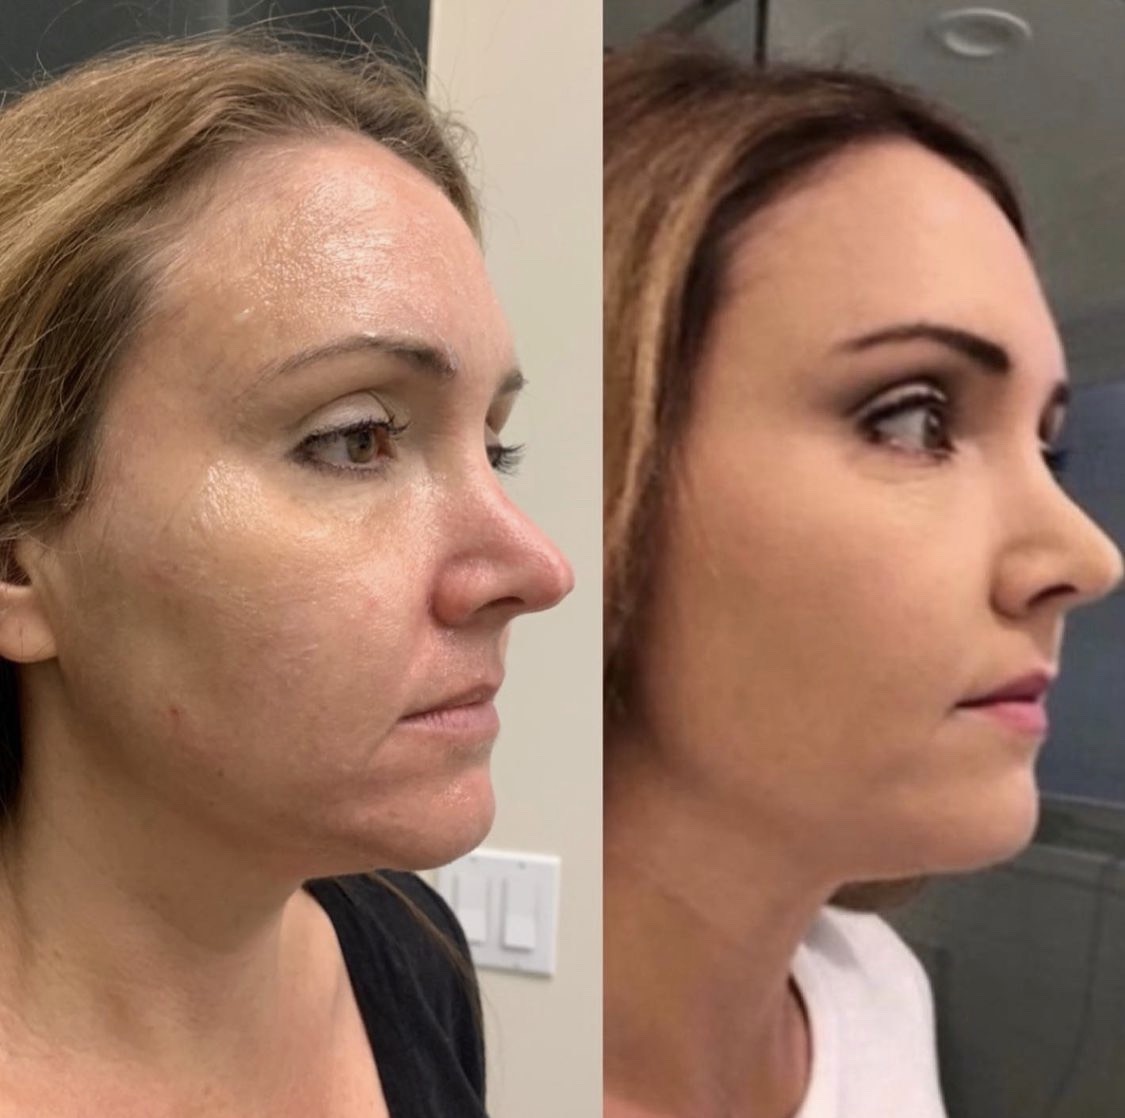 Scarlet (Radio-frequency plus Micro-needling) treatment for face lifting and tightening